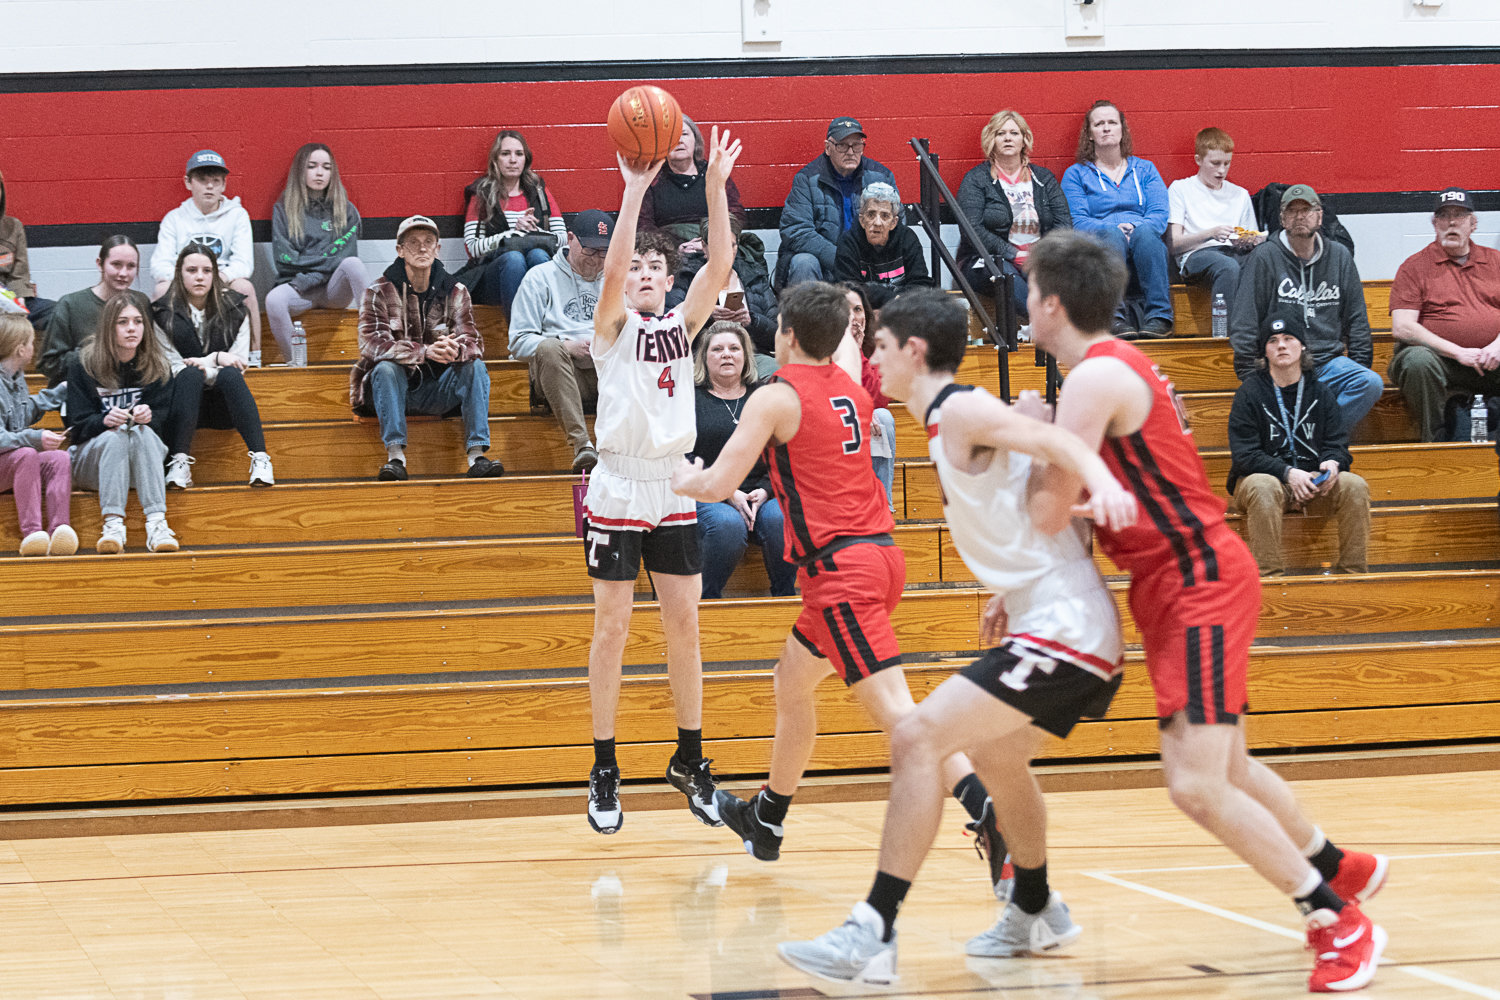 Preston Snider shoots a 3-pointer during the first quarter of Tenino's 65-46 win over Mossyrock on Jan. 18 at Brock Court.